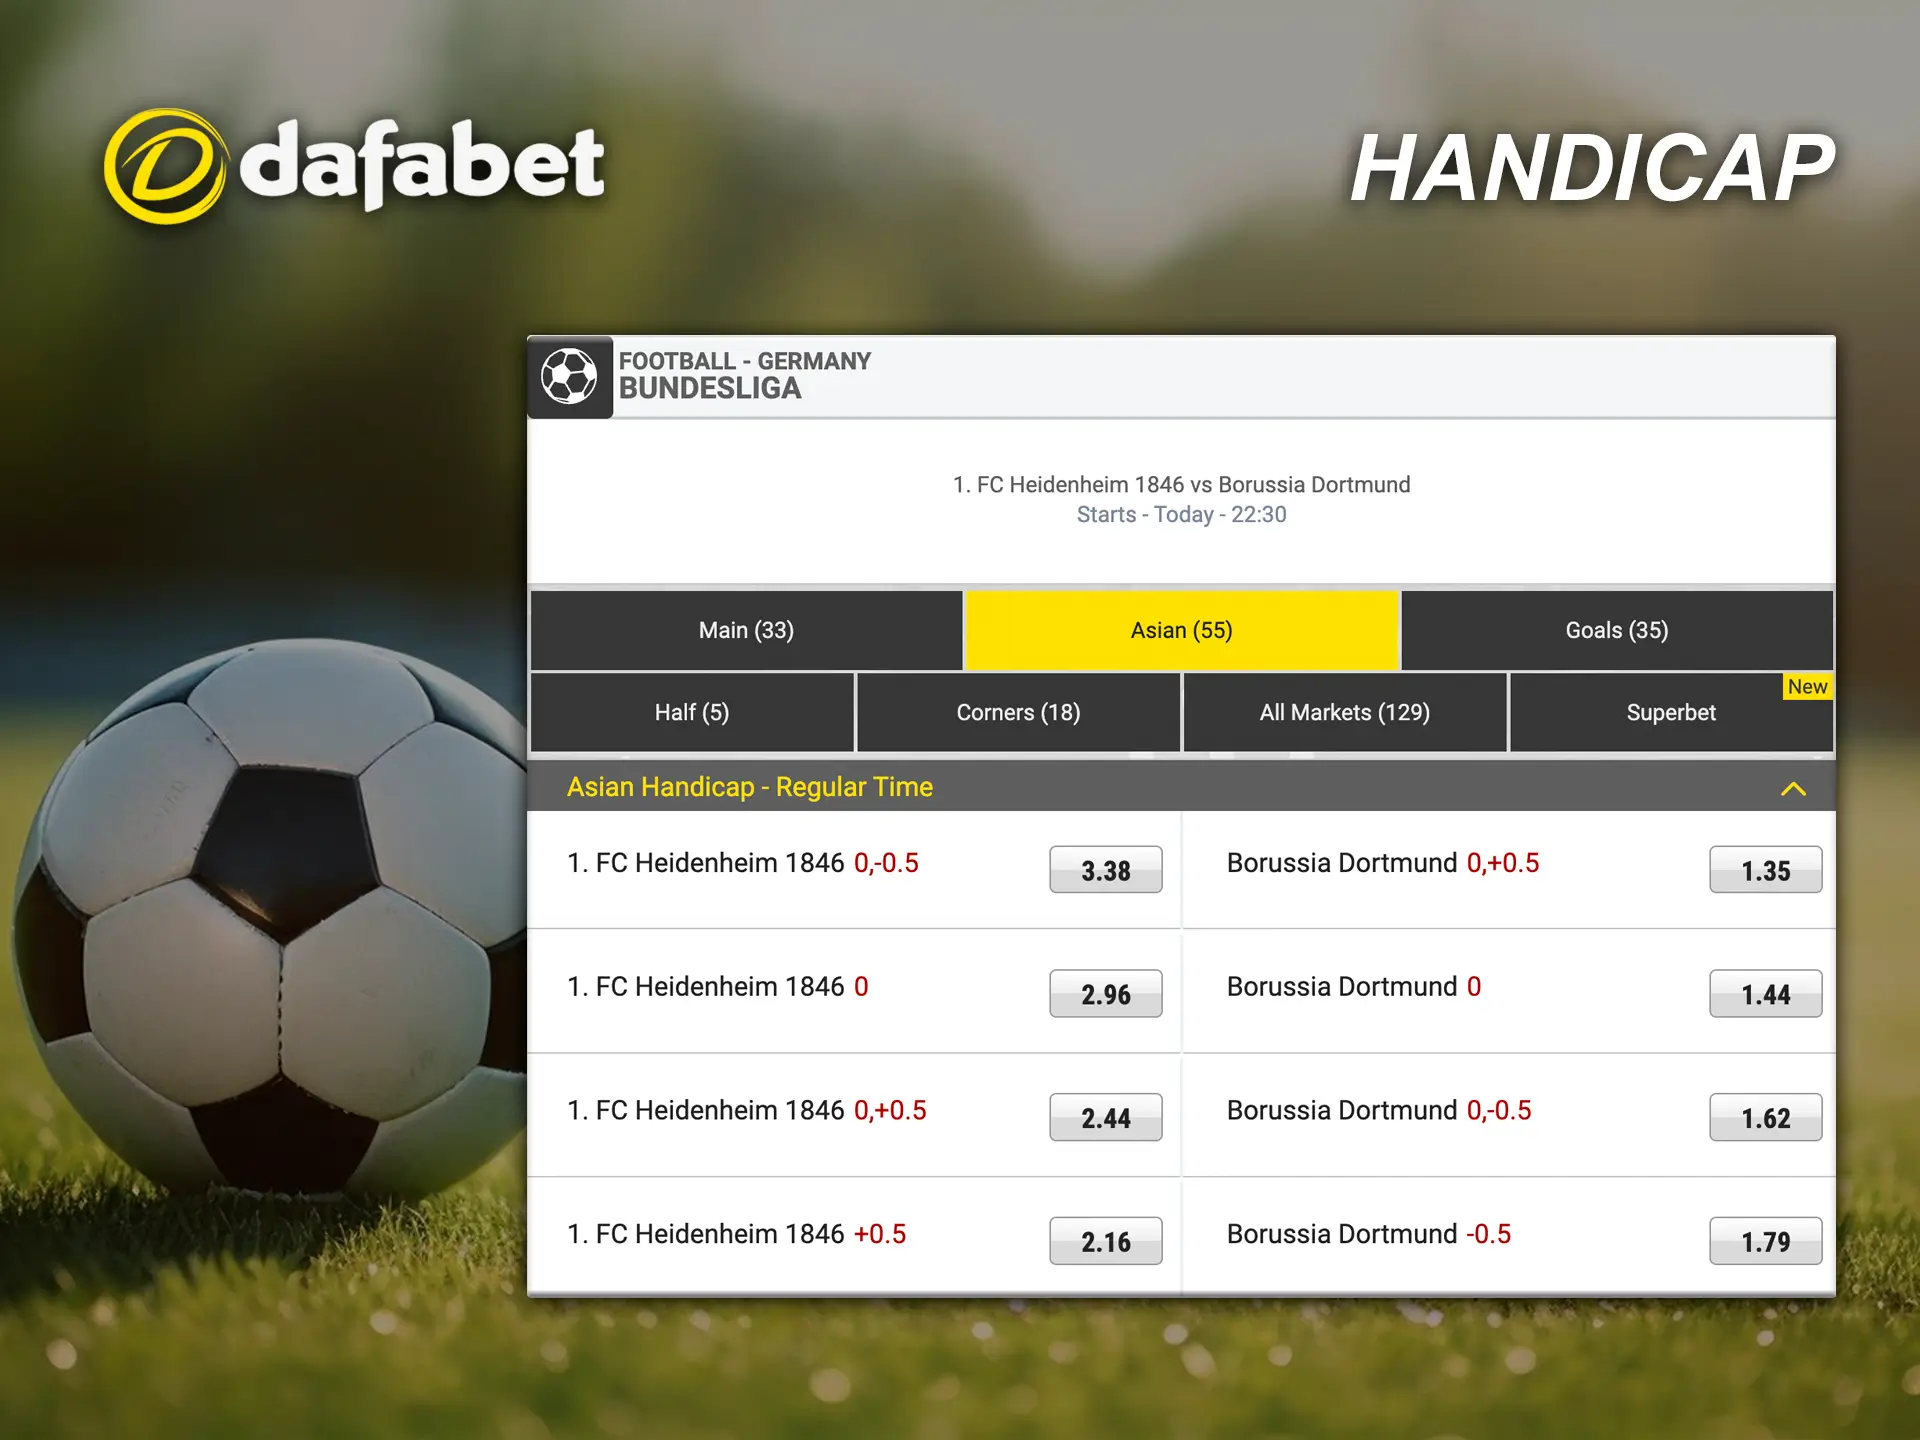 Dafabet gives good odds on Handicap bets in matches where there is a clear winner.